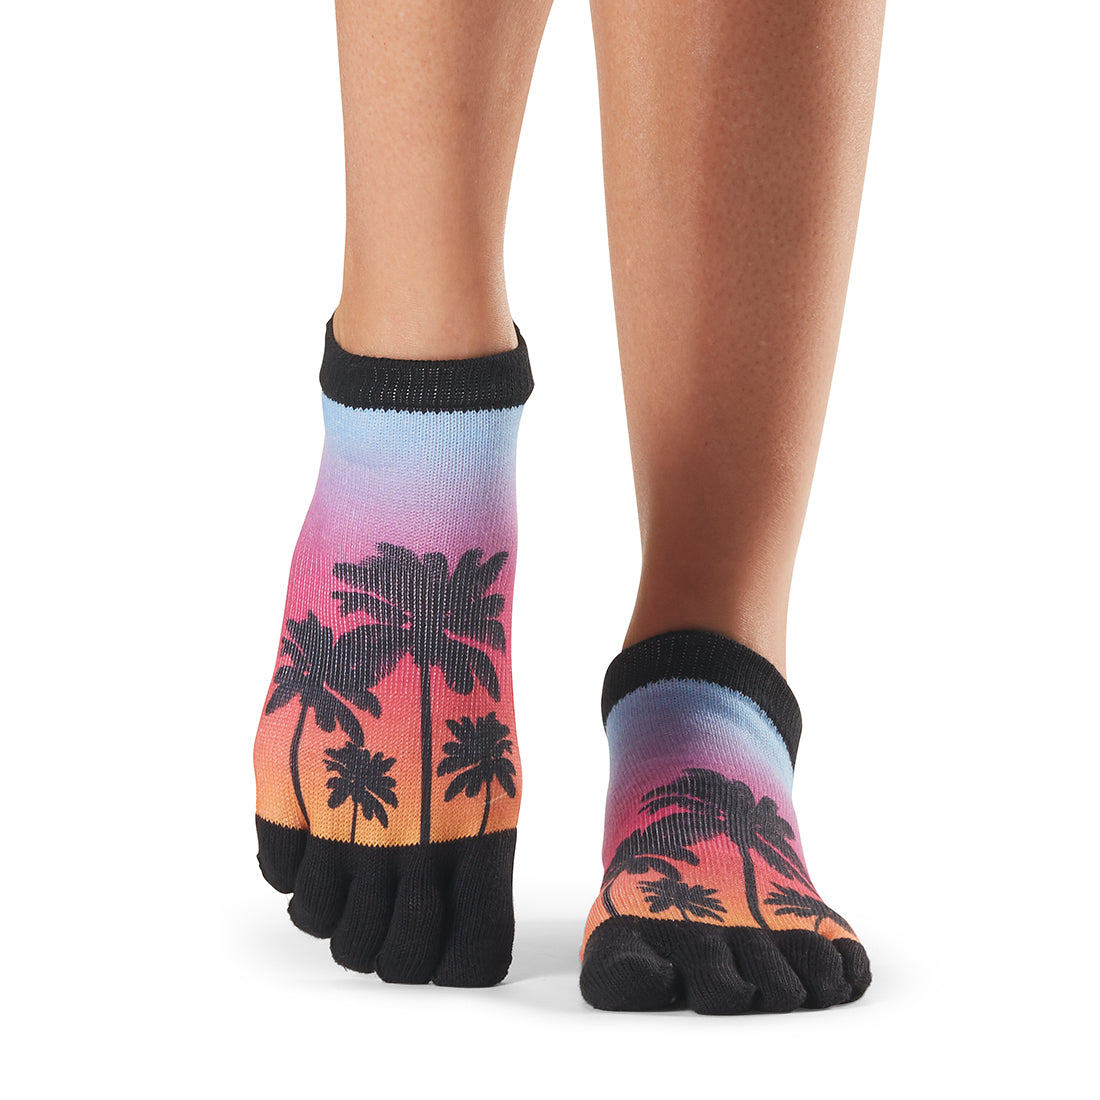 ToeSox - Low Rise Grip Socks - SPRING 2020 - T8 Fitness - Asia Yoga, Pilates,  Rehab, Fitness Products